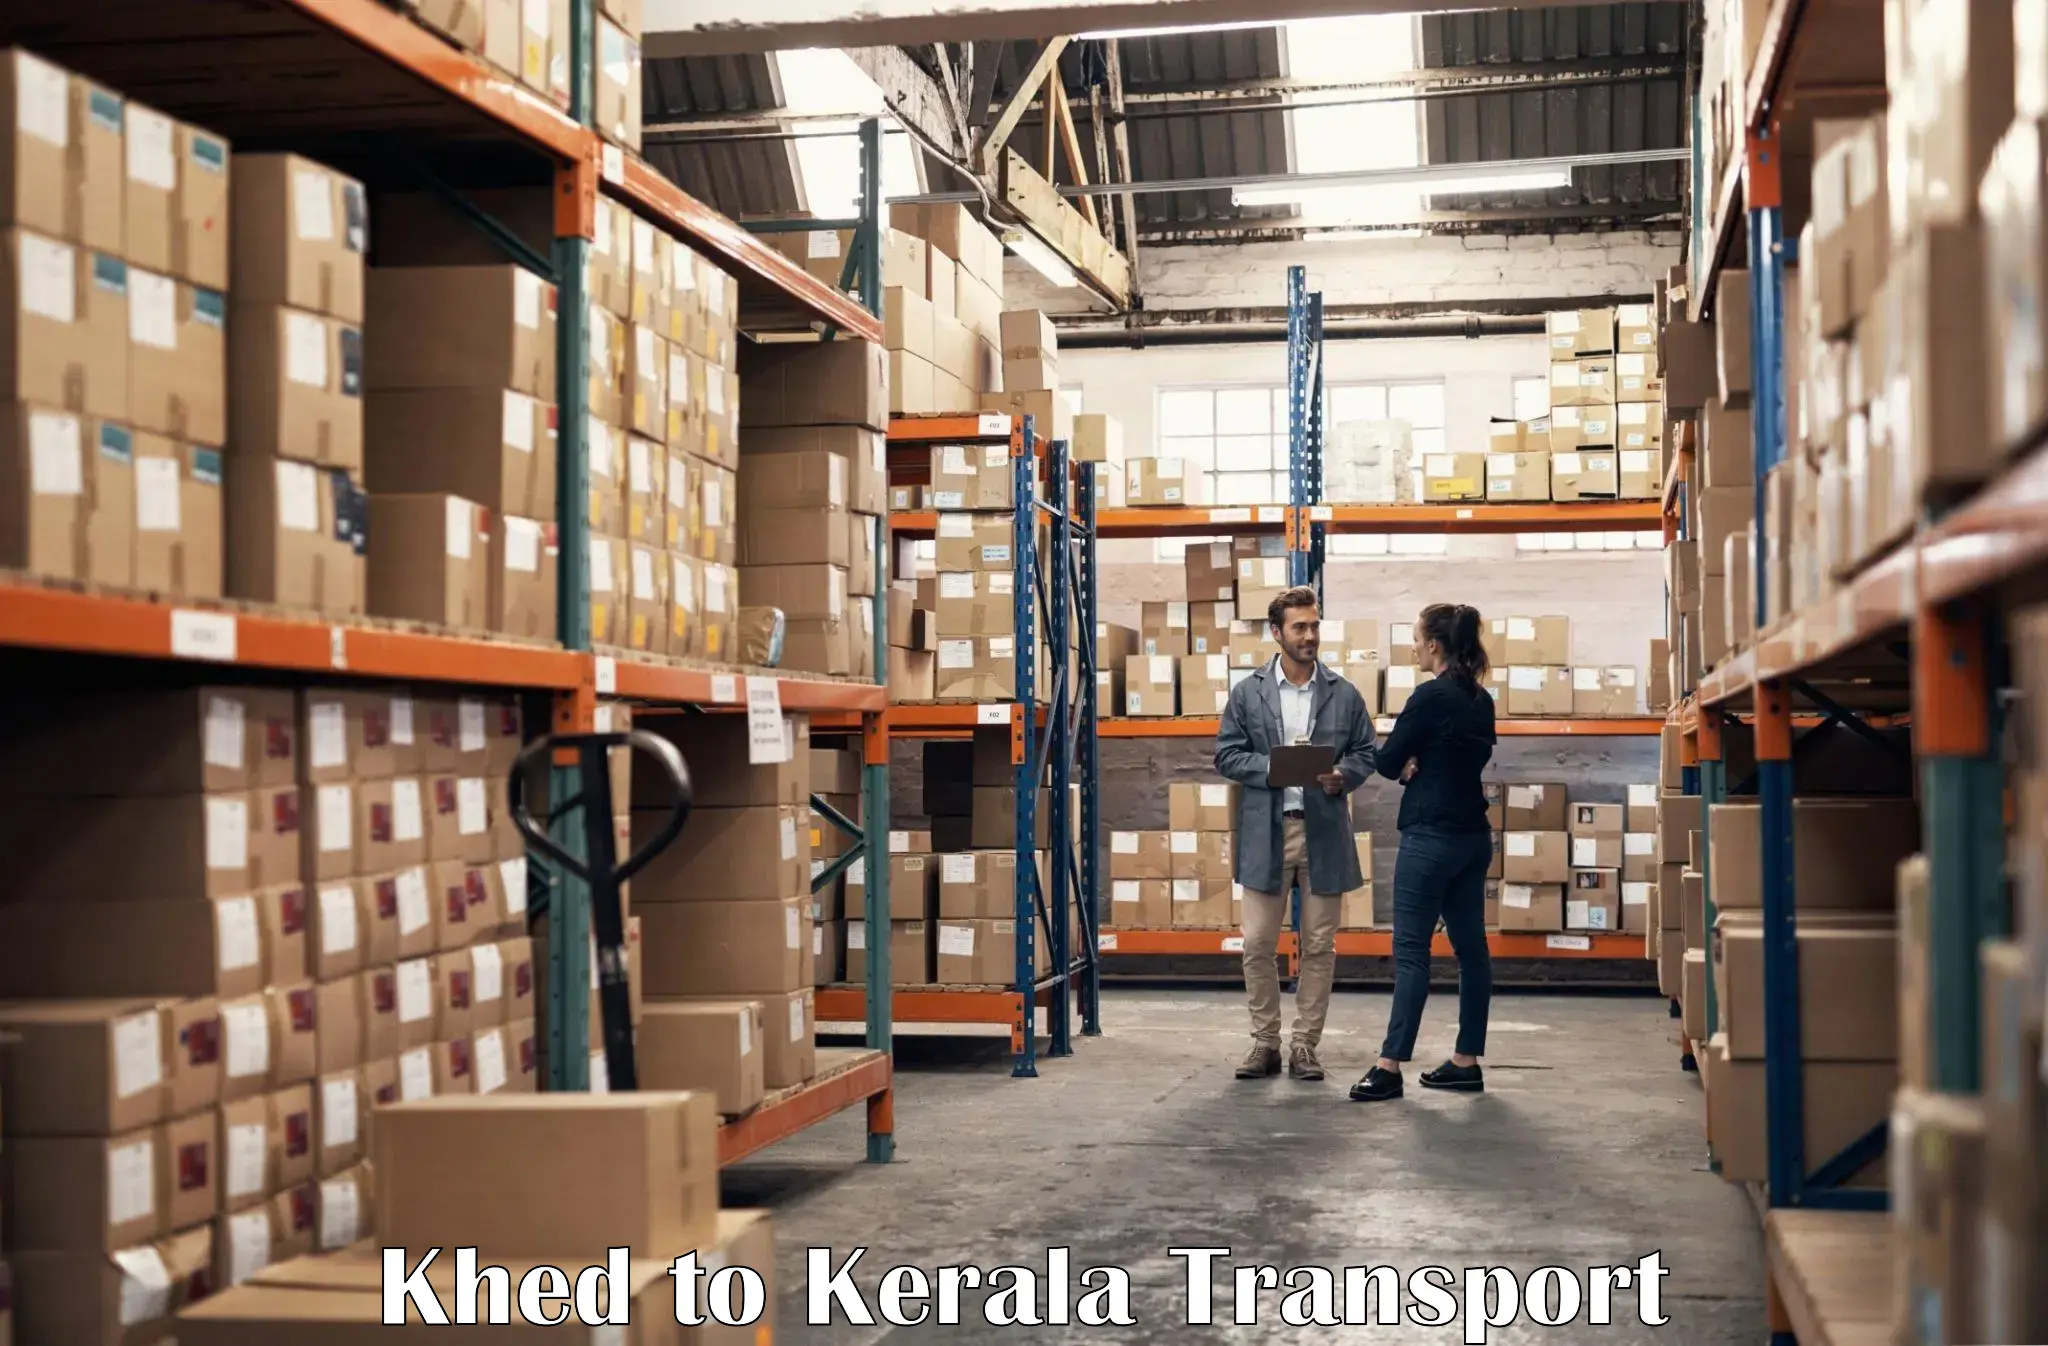 Truck transport companies in India Khed to Calicut